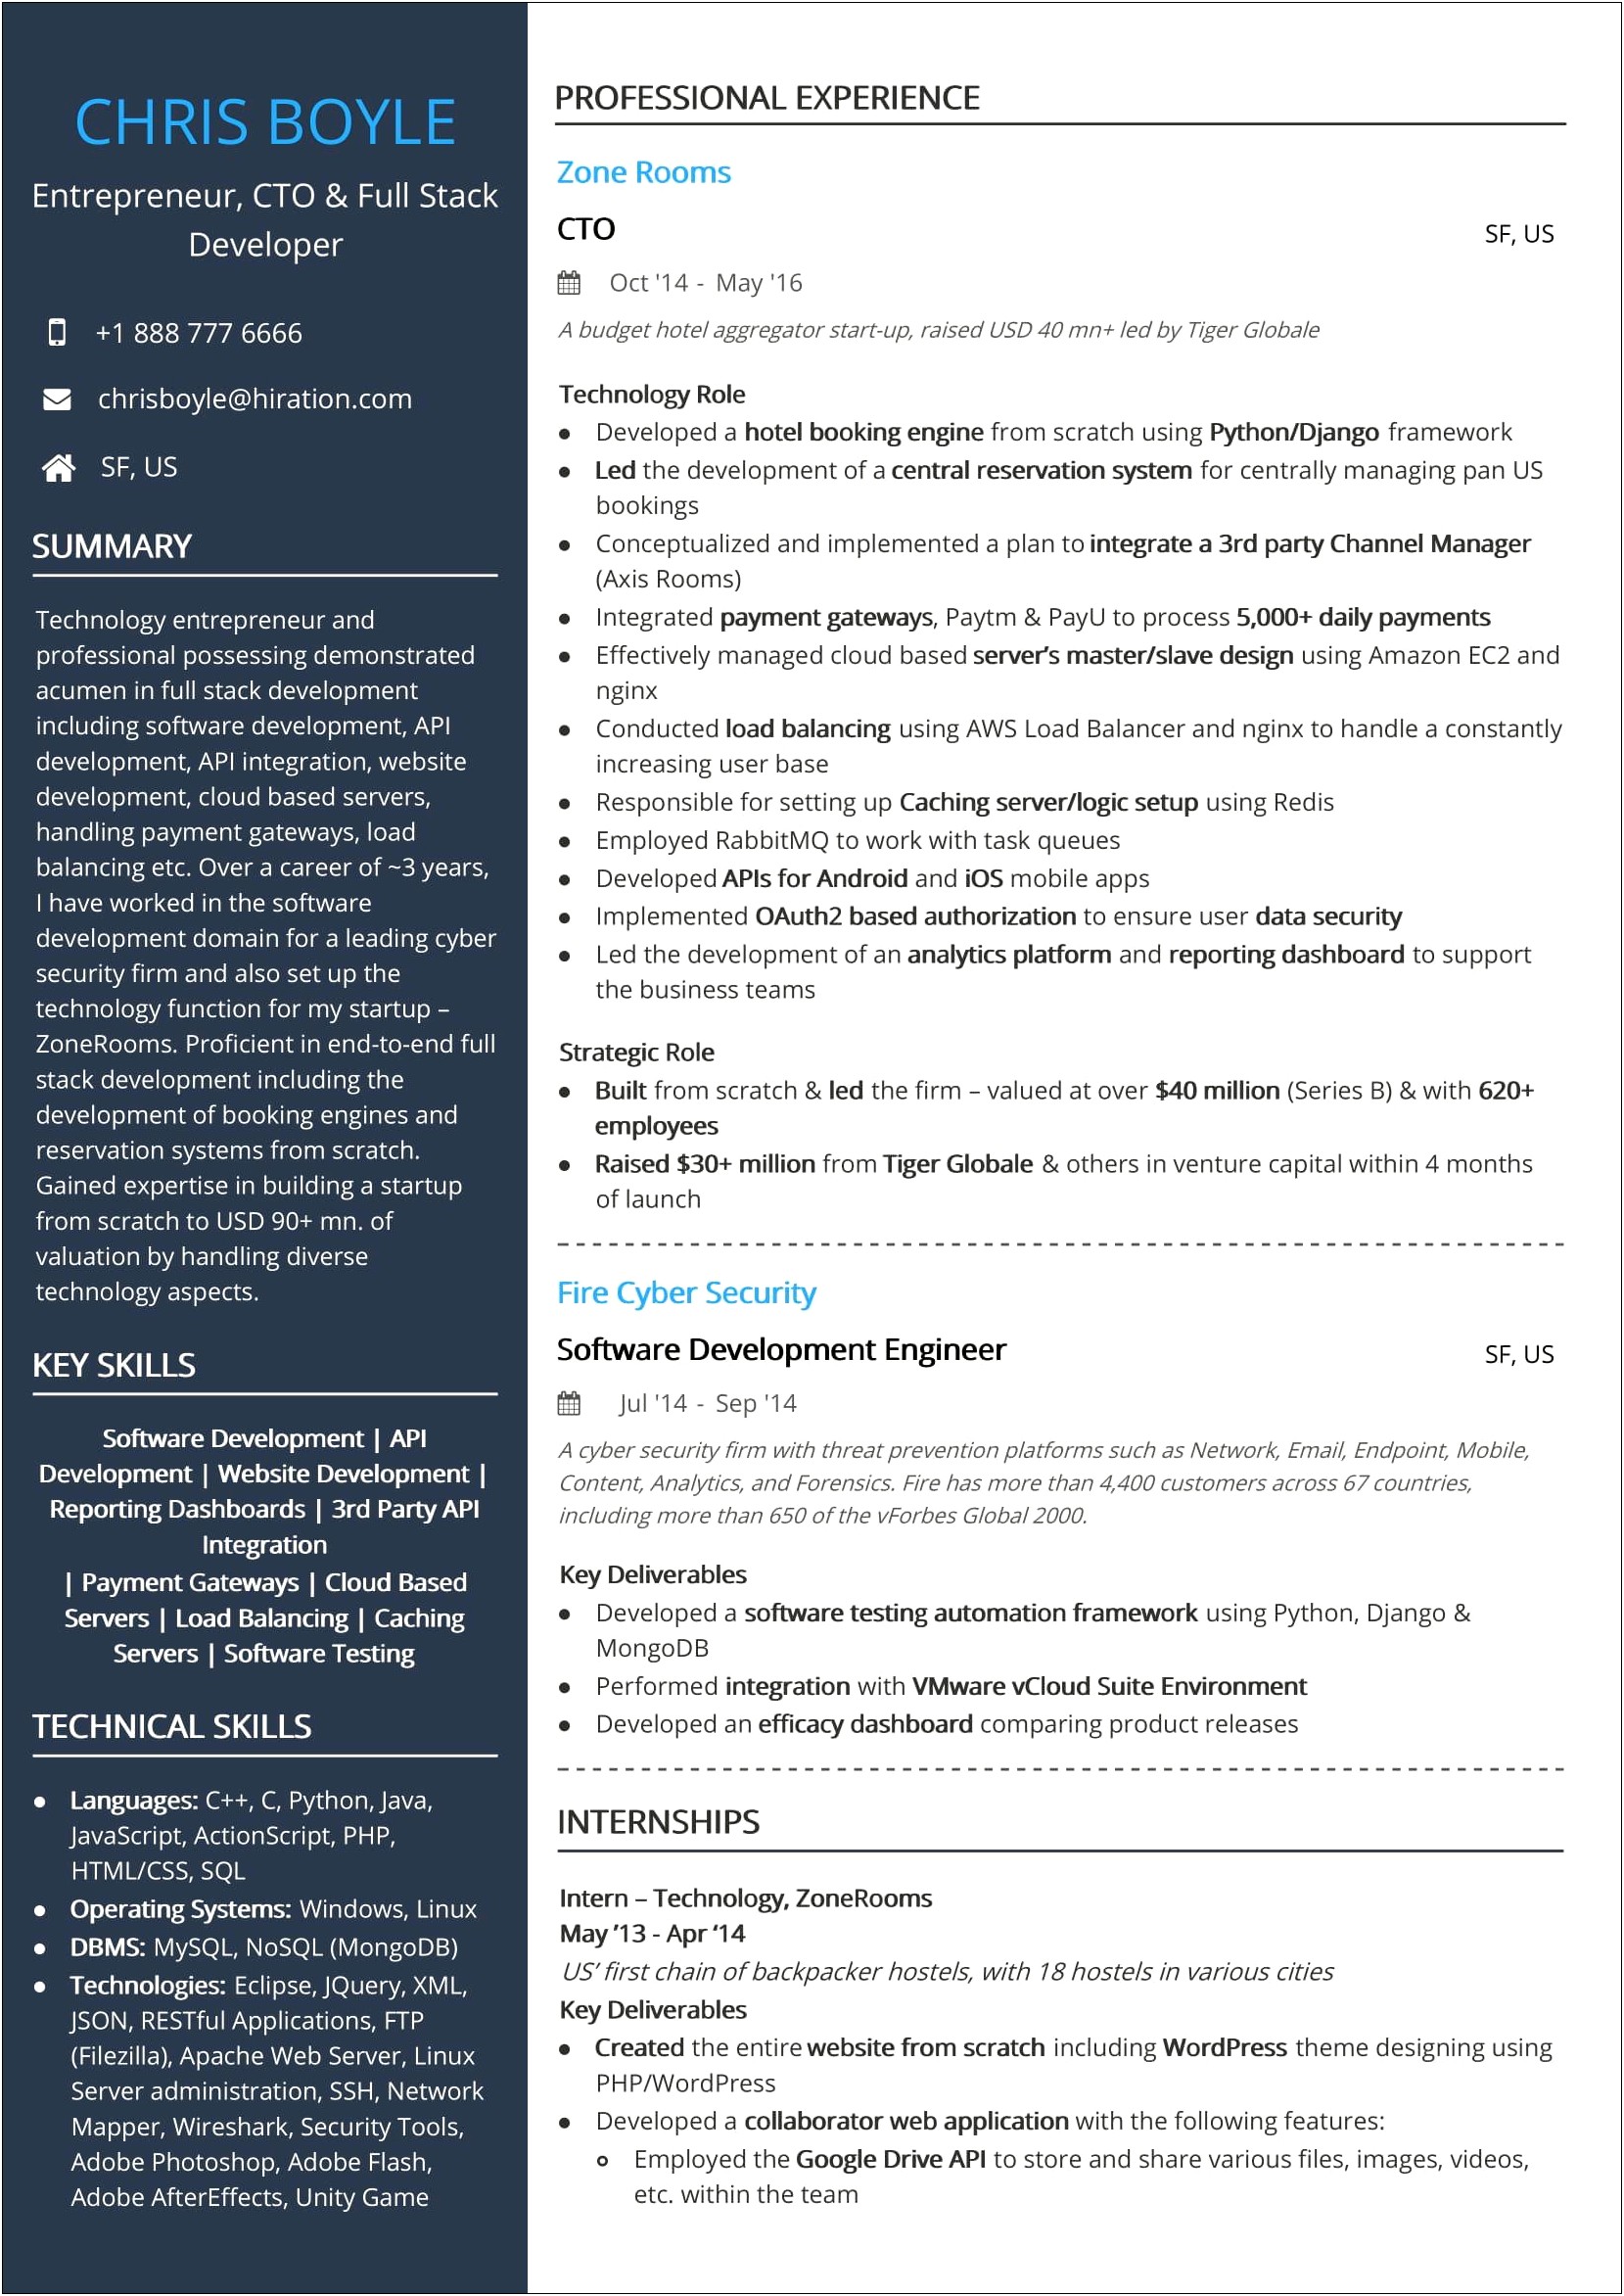 Design Or Architecture Experience Around Vmware Resume Examples